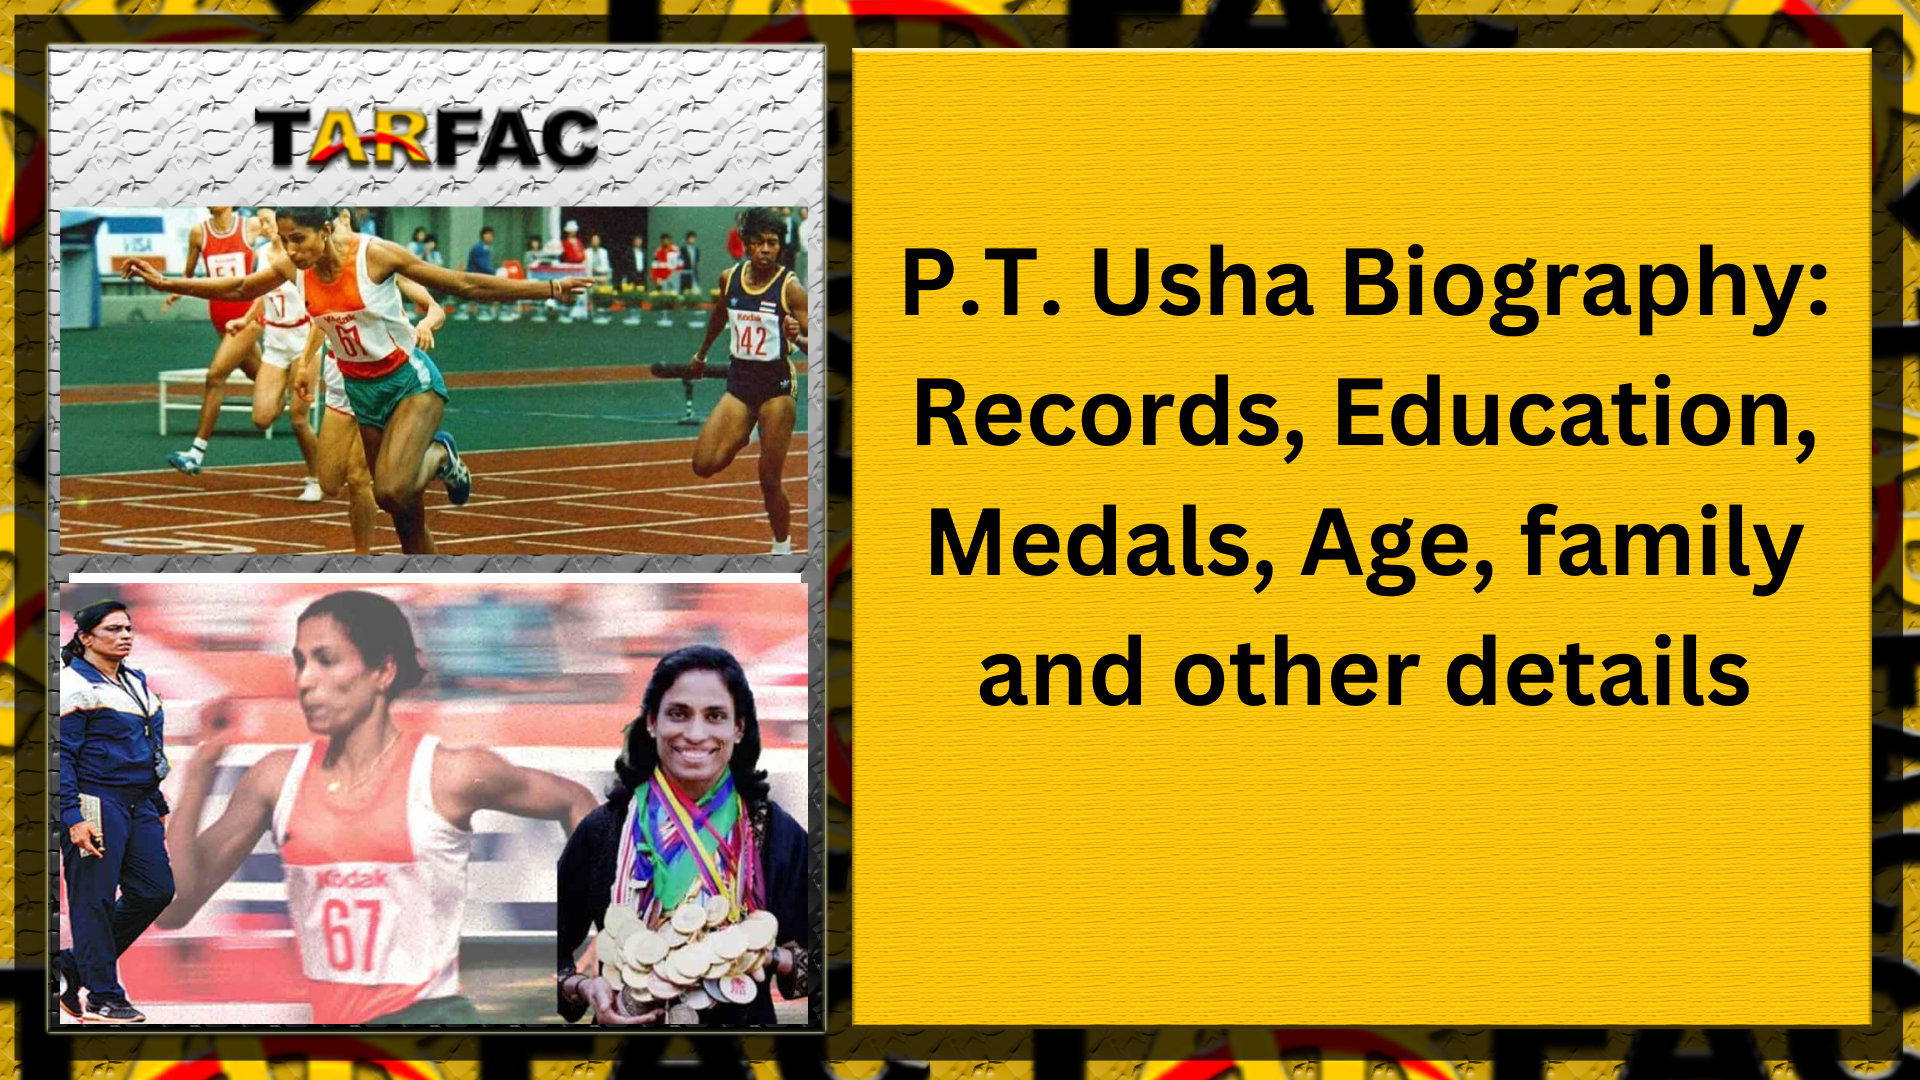 You are currently viewing P.T. Usha Biography: Records, Education, Medals, Age, family and other details